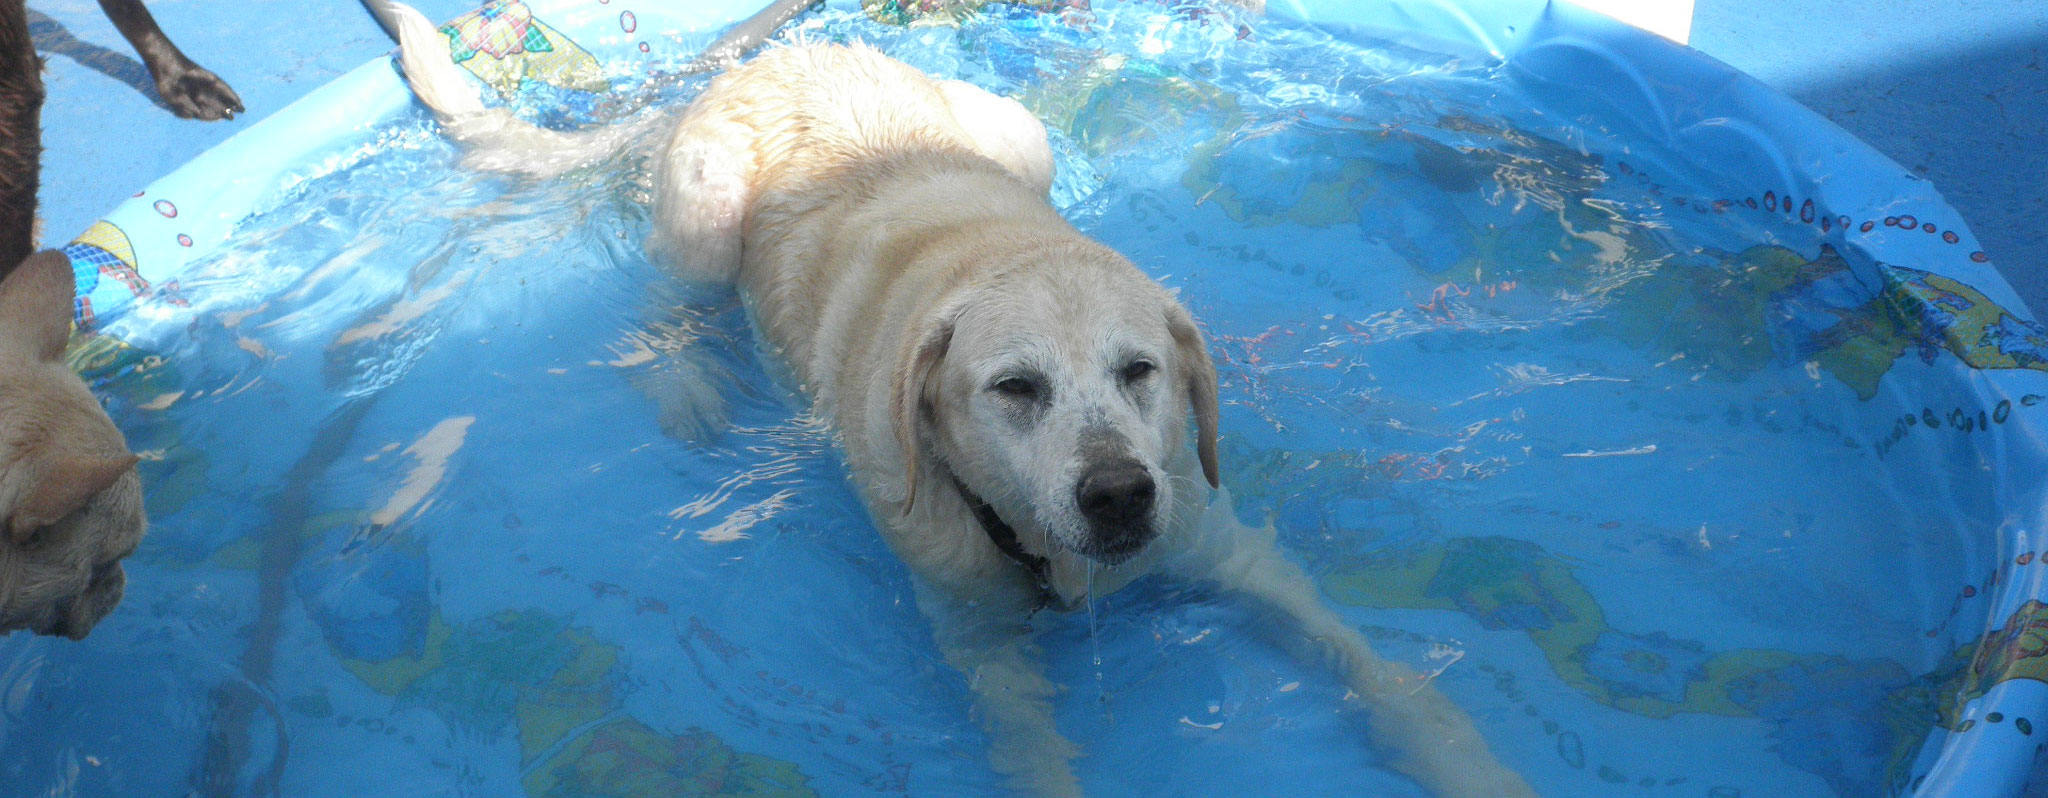 Dog relaxing in the pool at SoBo Dog Daycare in Baltimore City